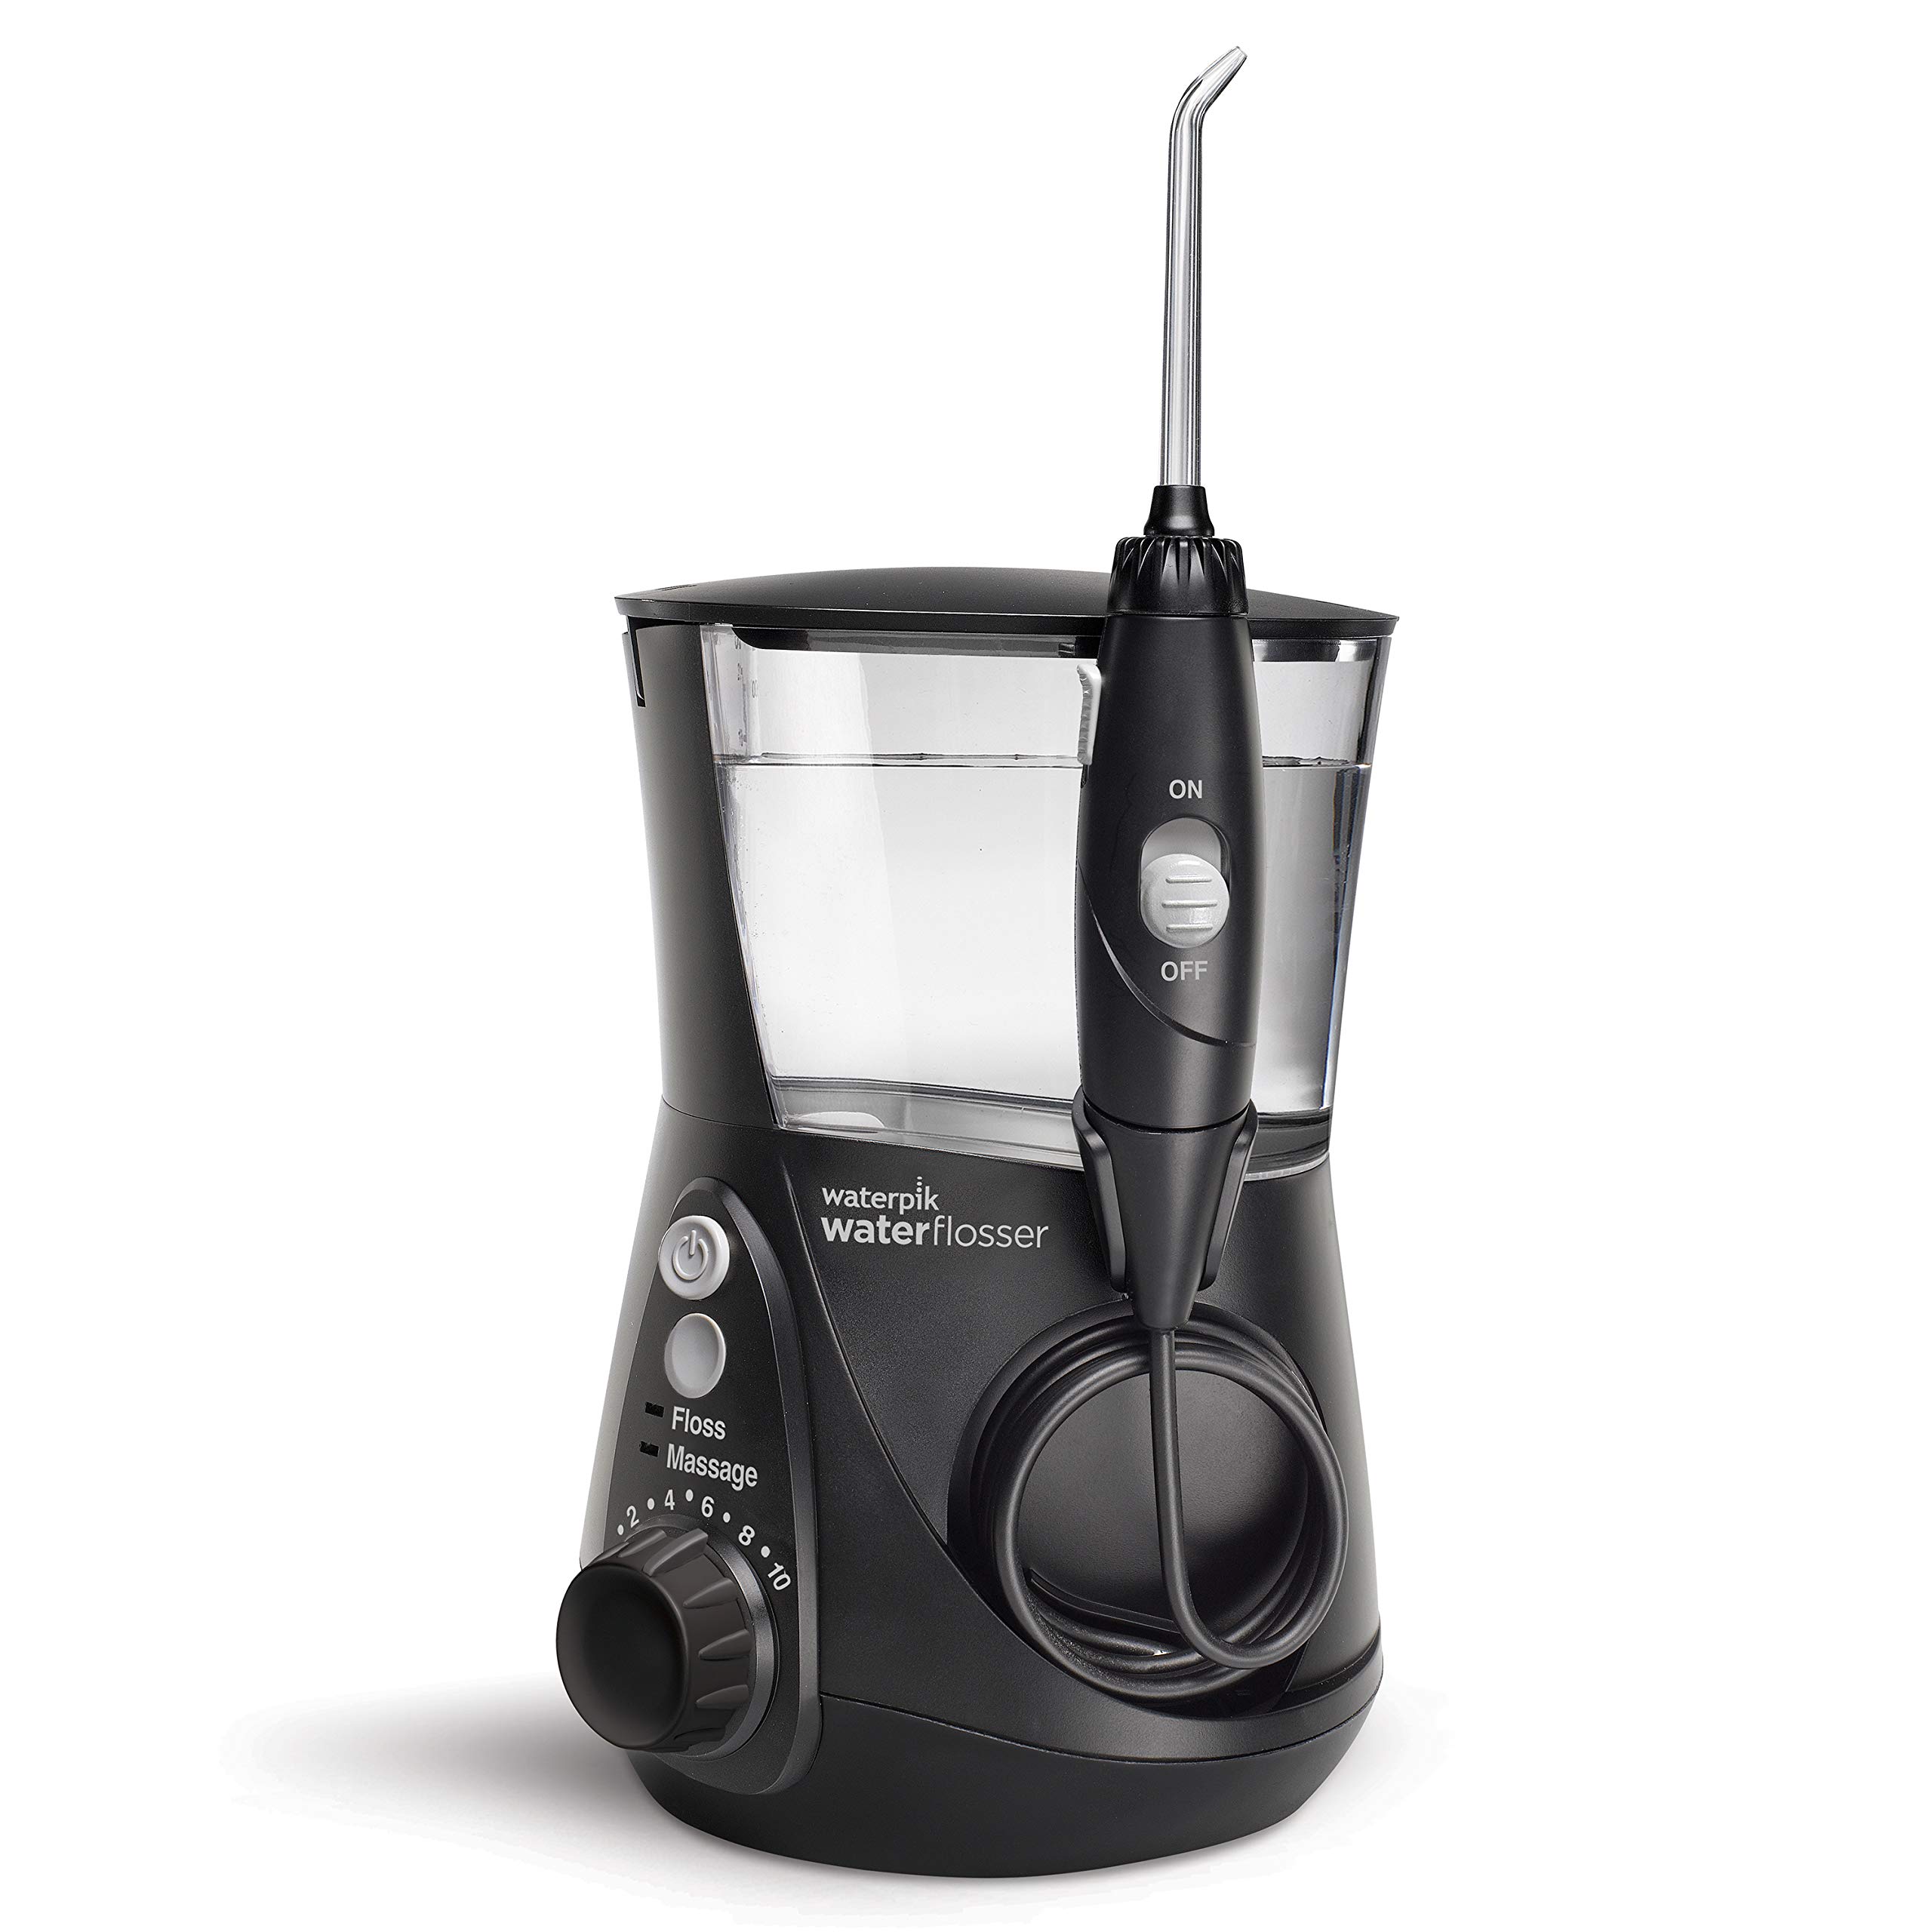 Book Cover Waterpik Aquarius Water Flosser Professional For Teeth, Gums, Braces, Dental Care, Electric Power With 10 Settings, 7 Tips For Multiple Users And Needs, ADA Accepted, Black WP-662